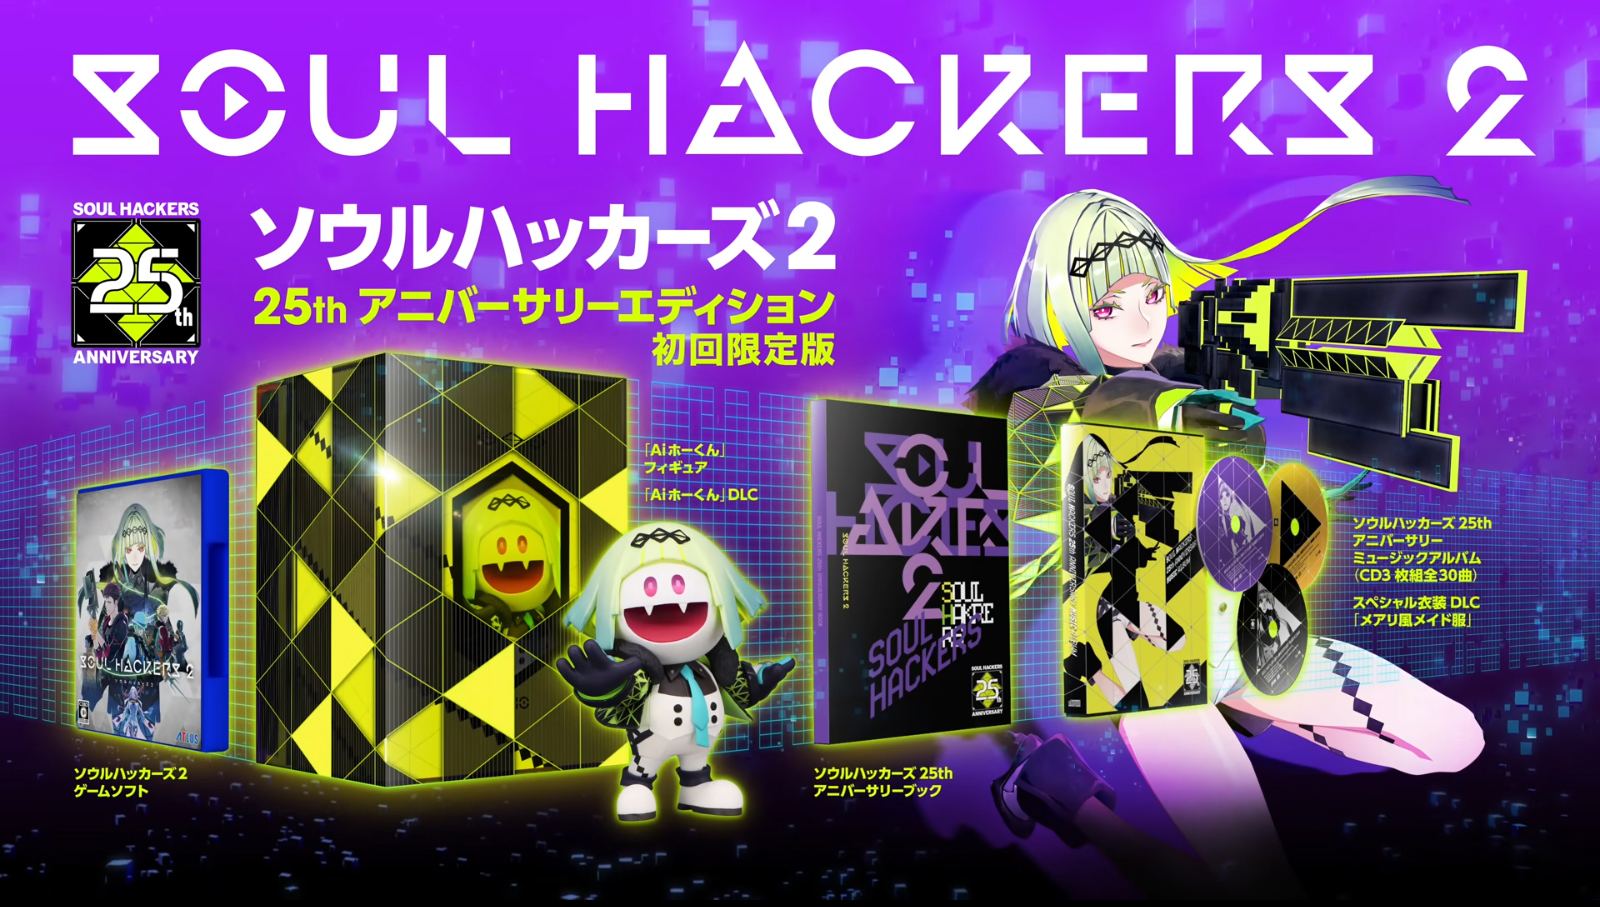 Review: 'Soul Hackers 2' is a refreshing new experience for the